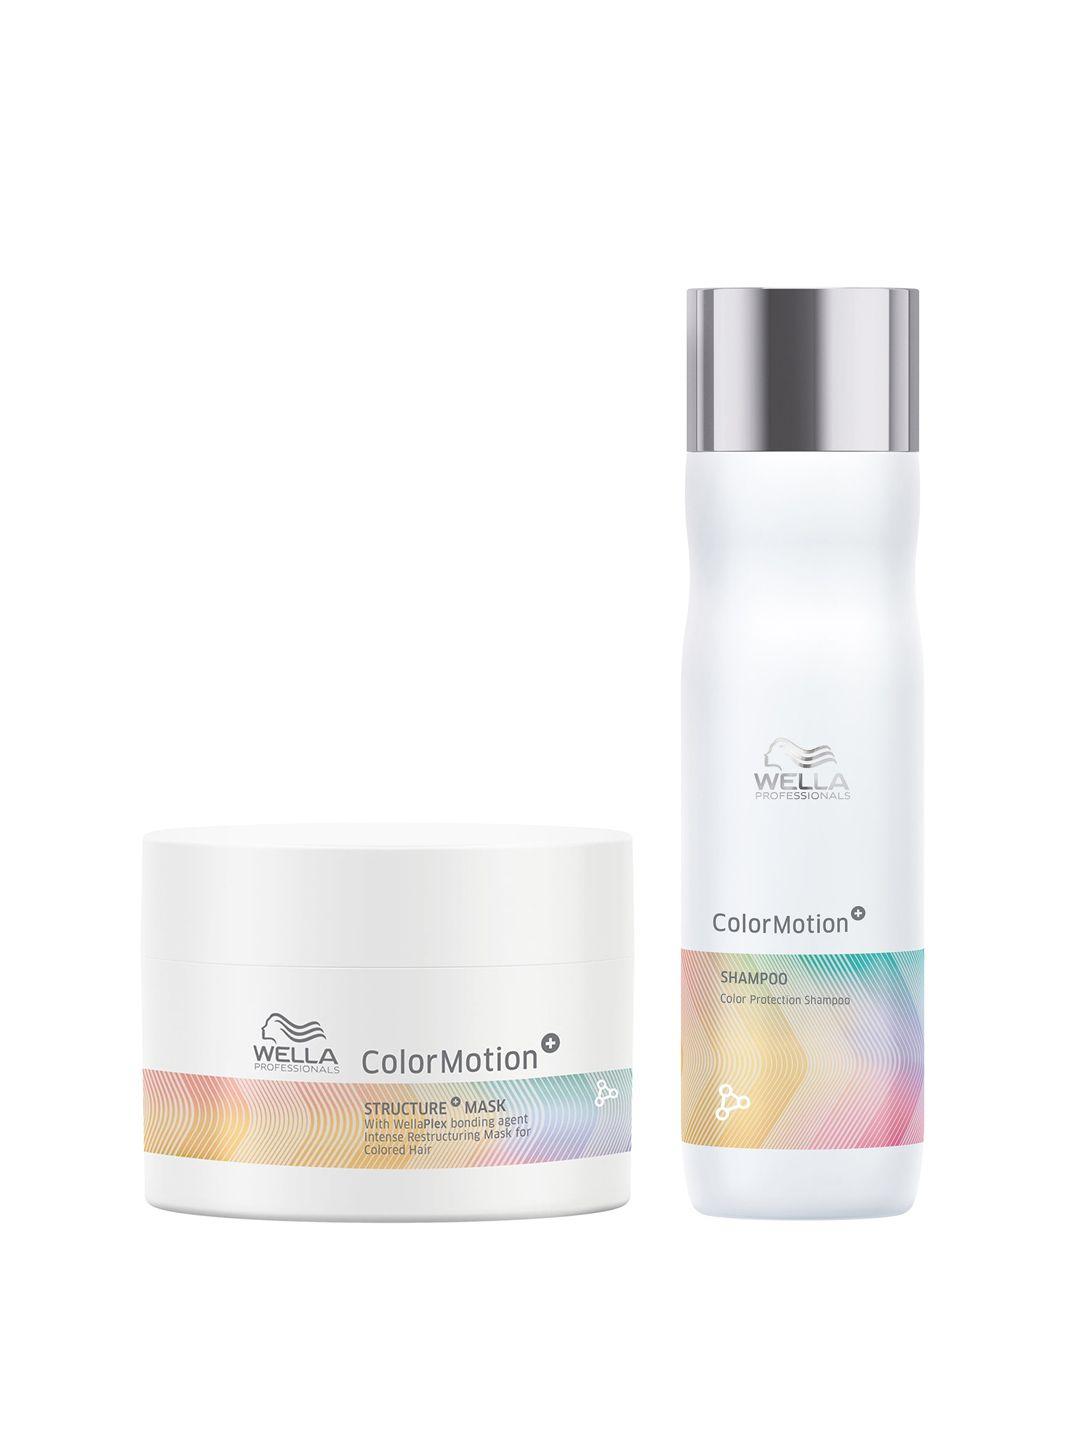 wella professionals colormotion+ color protection shampoo 250 ml & structure+ mask 150ml